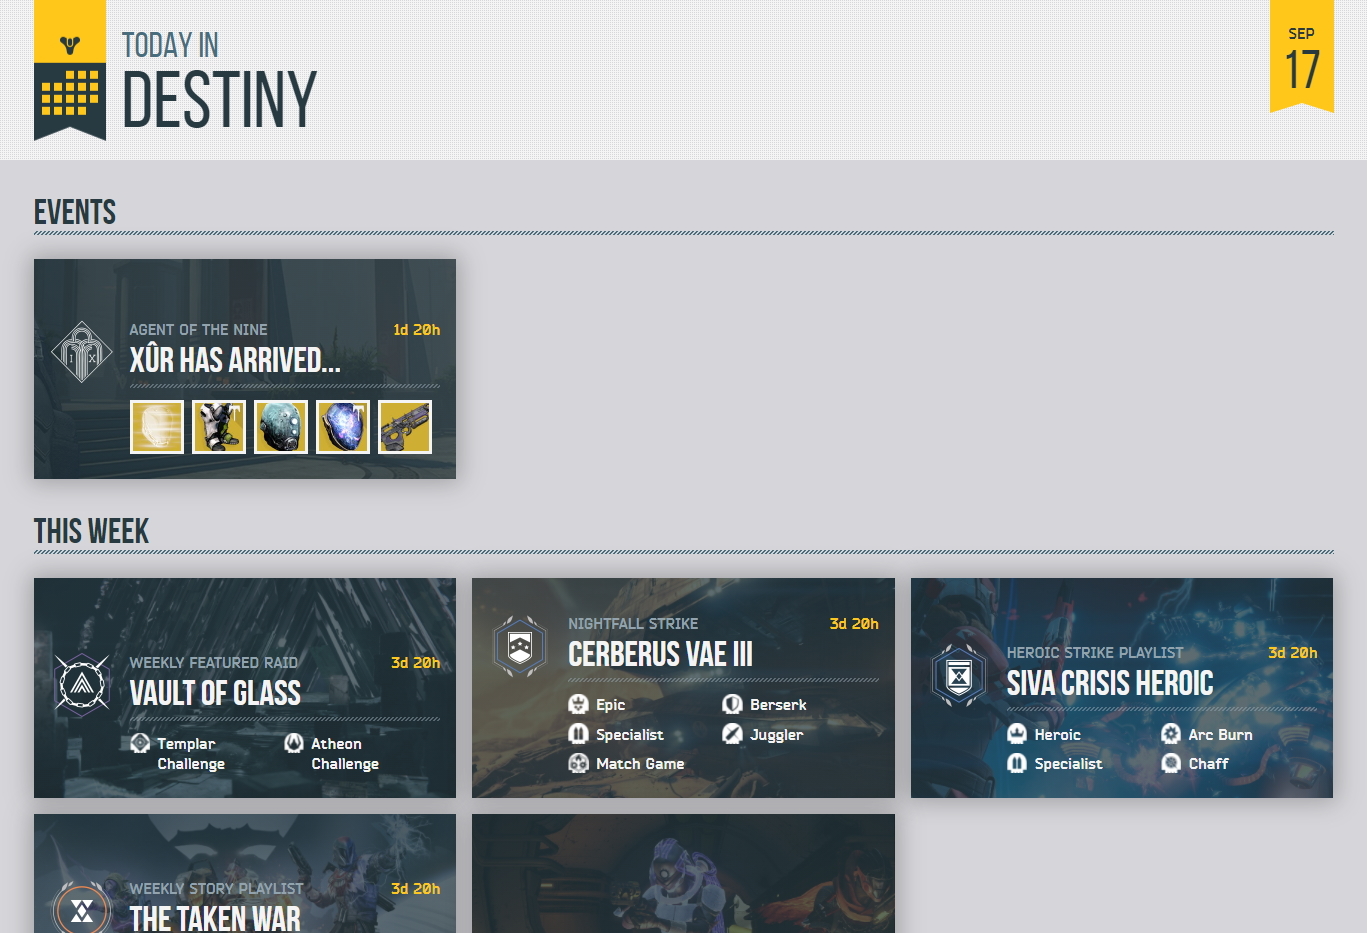 Today in Destiny - Homepage